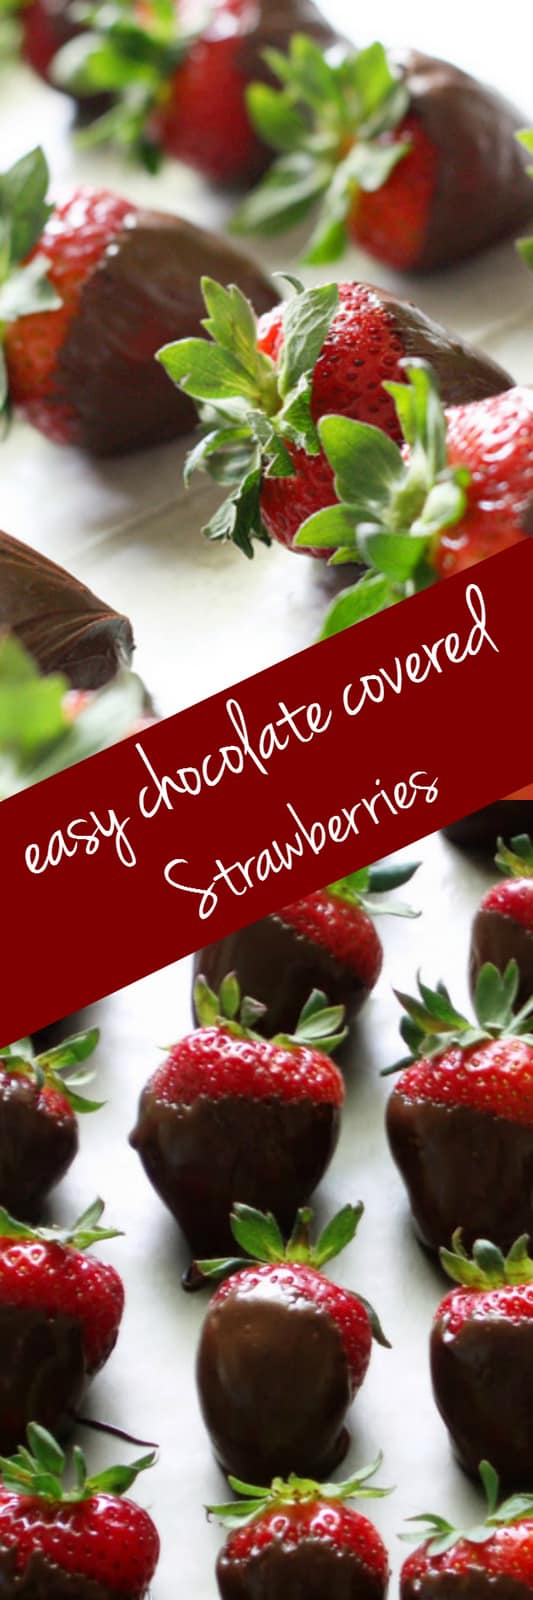 Delicious and simple chocolate covered strawberries are a sweet and stunning dessert!